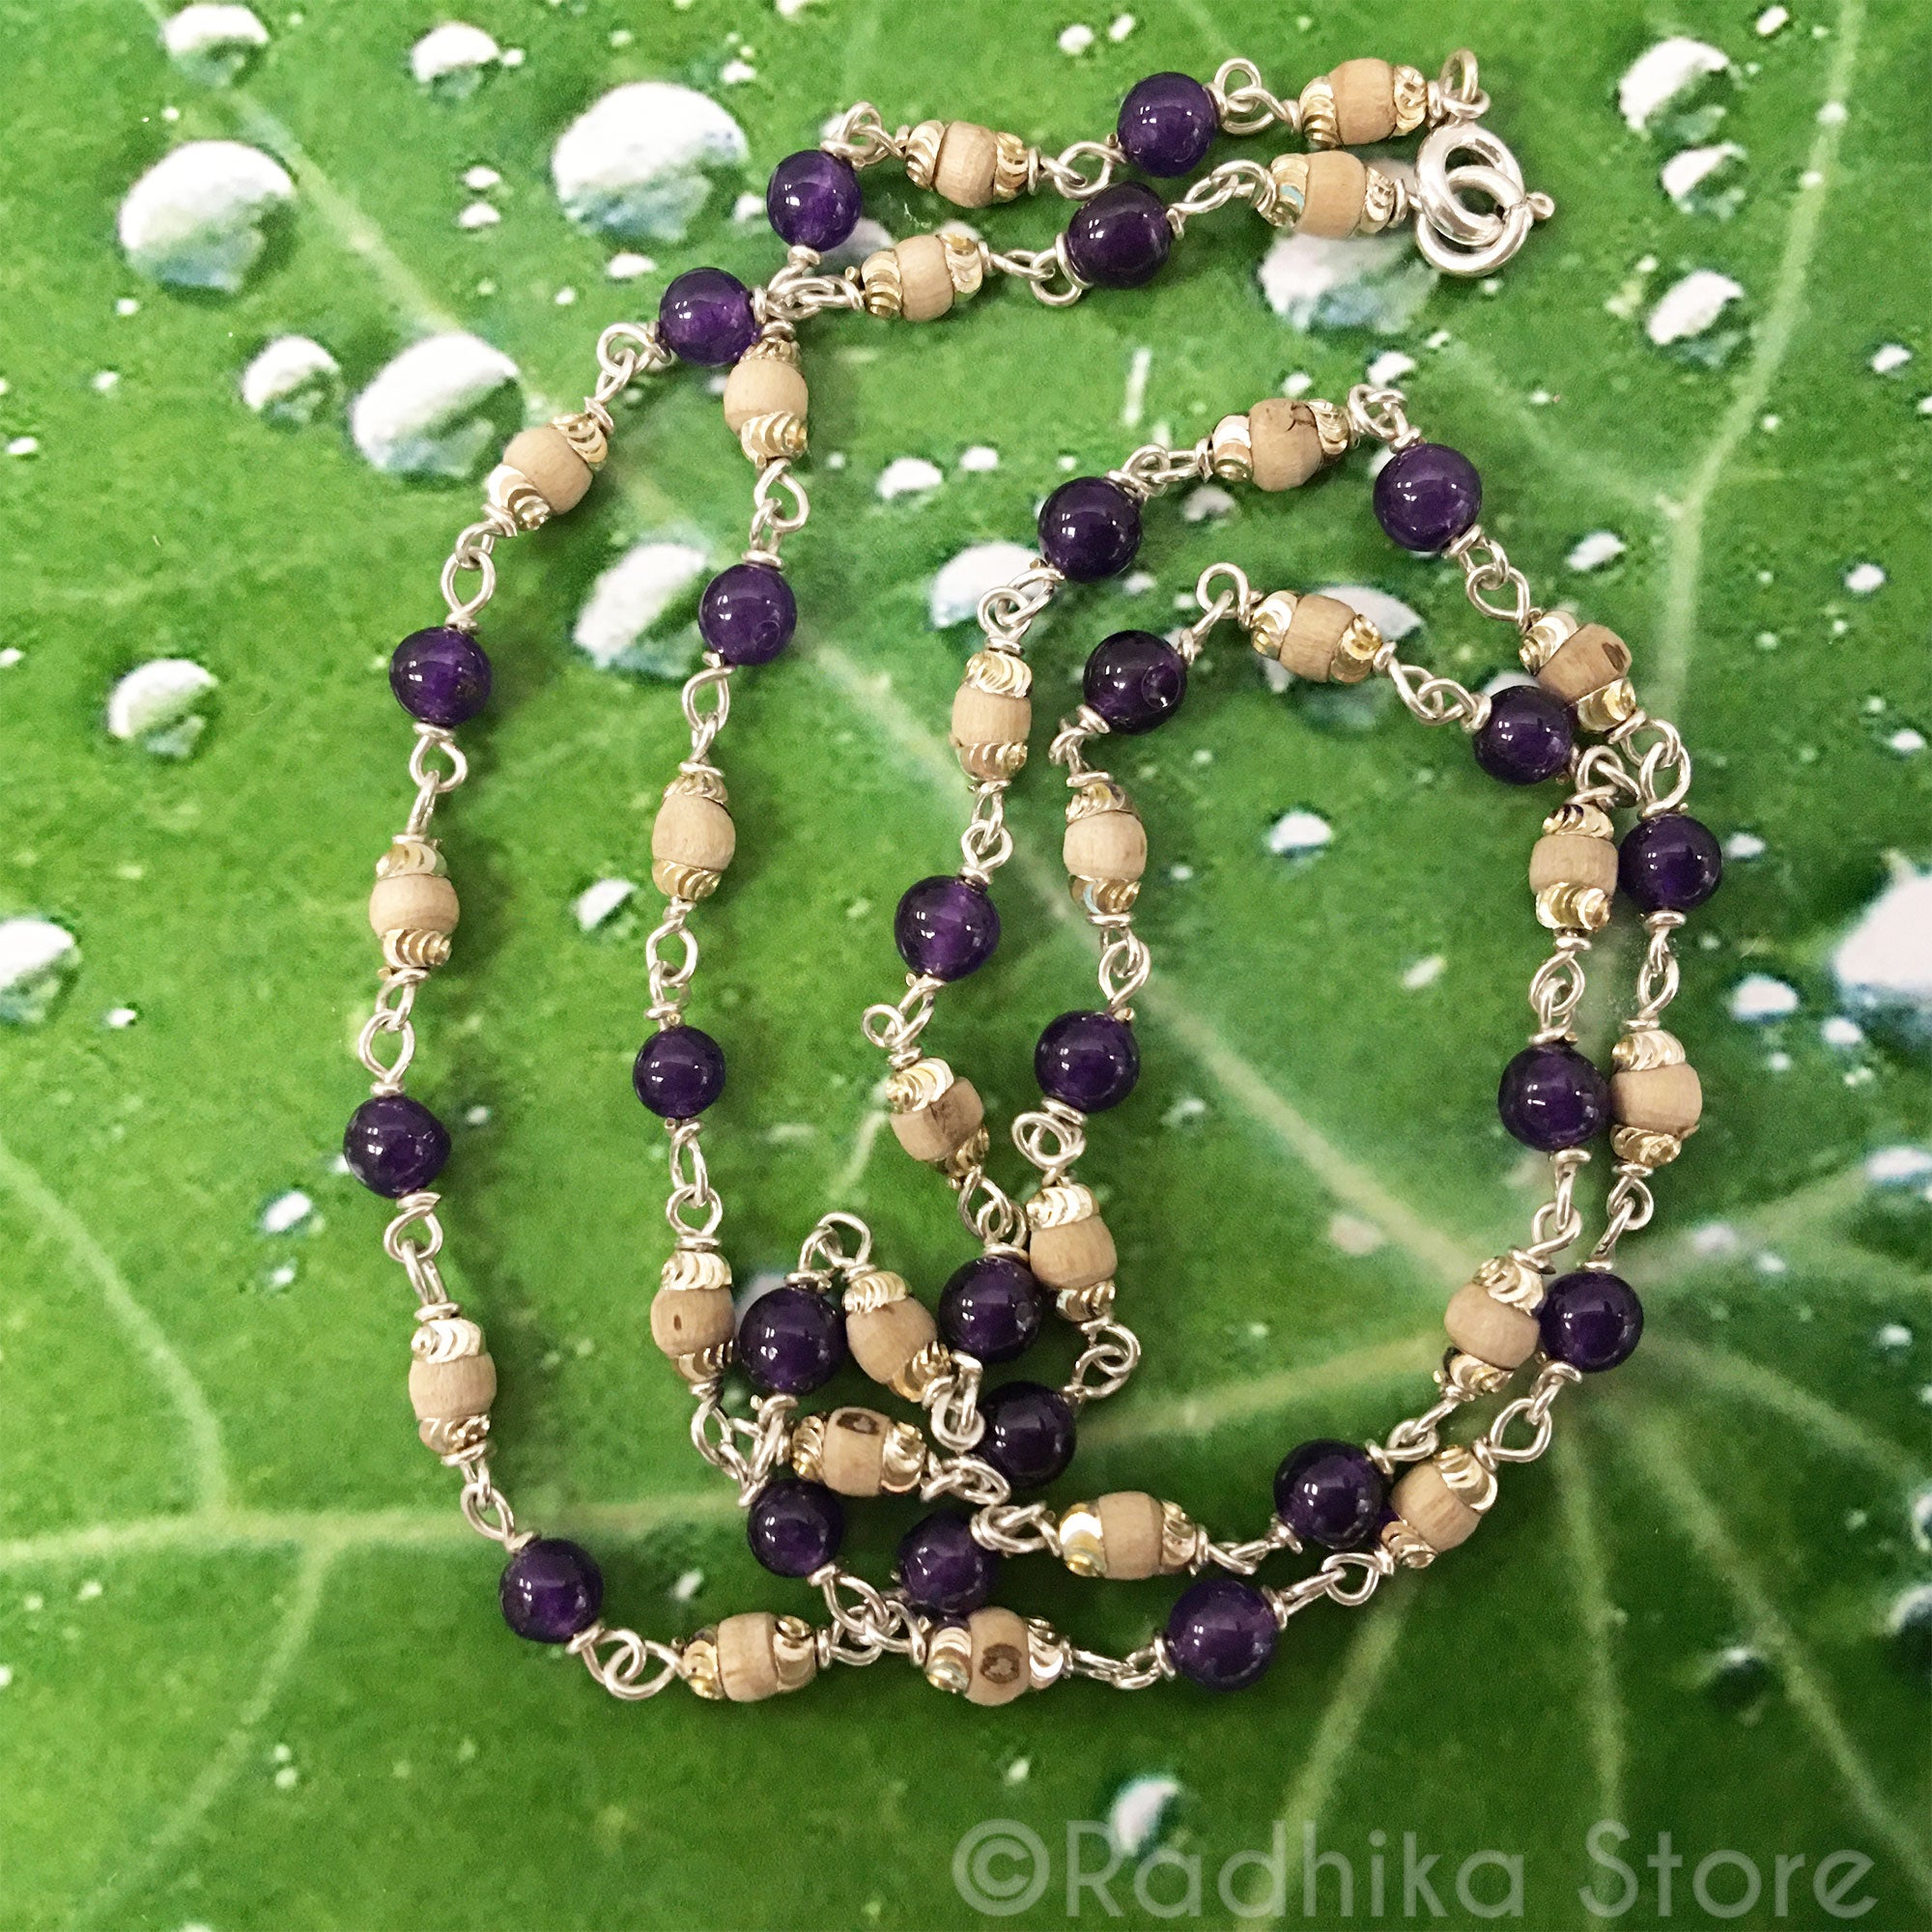 Rinky Black Amethyst Beads Necklace – AG'S